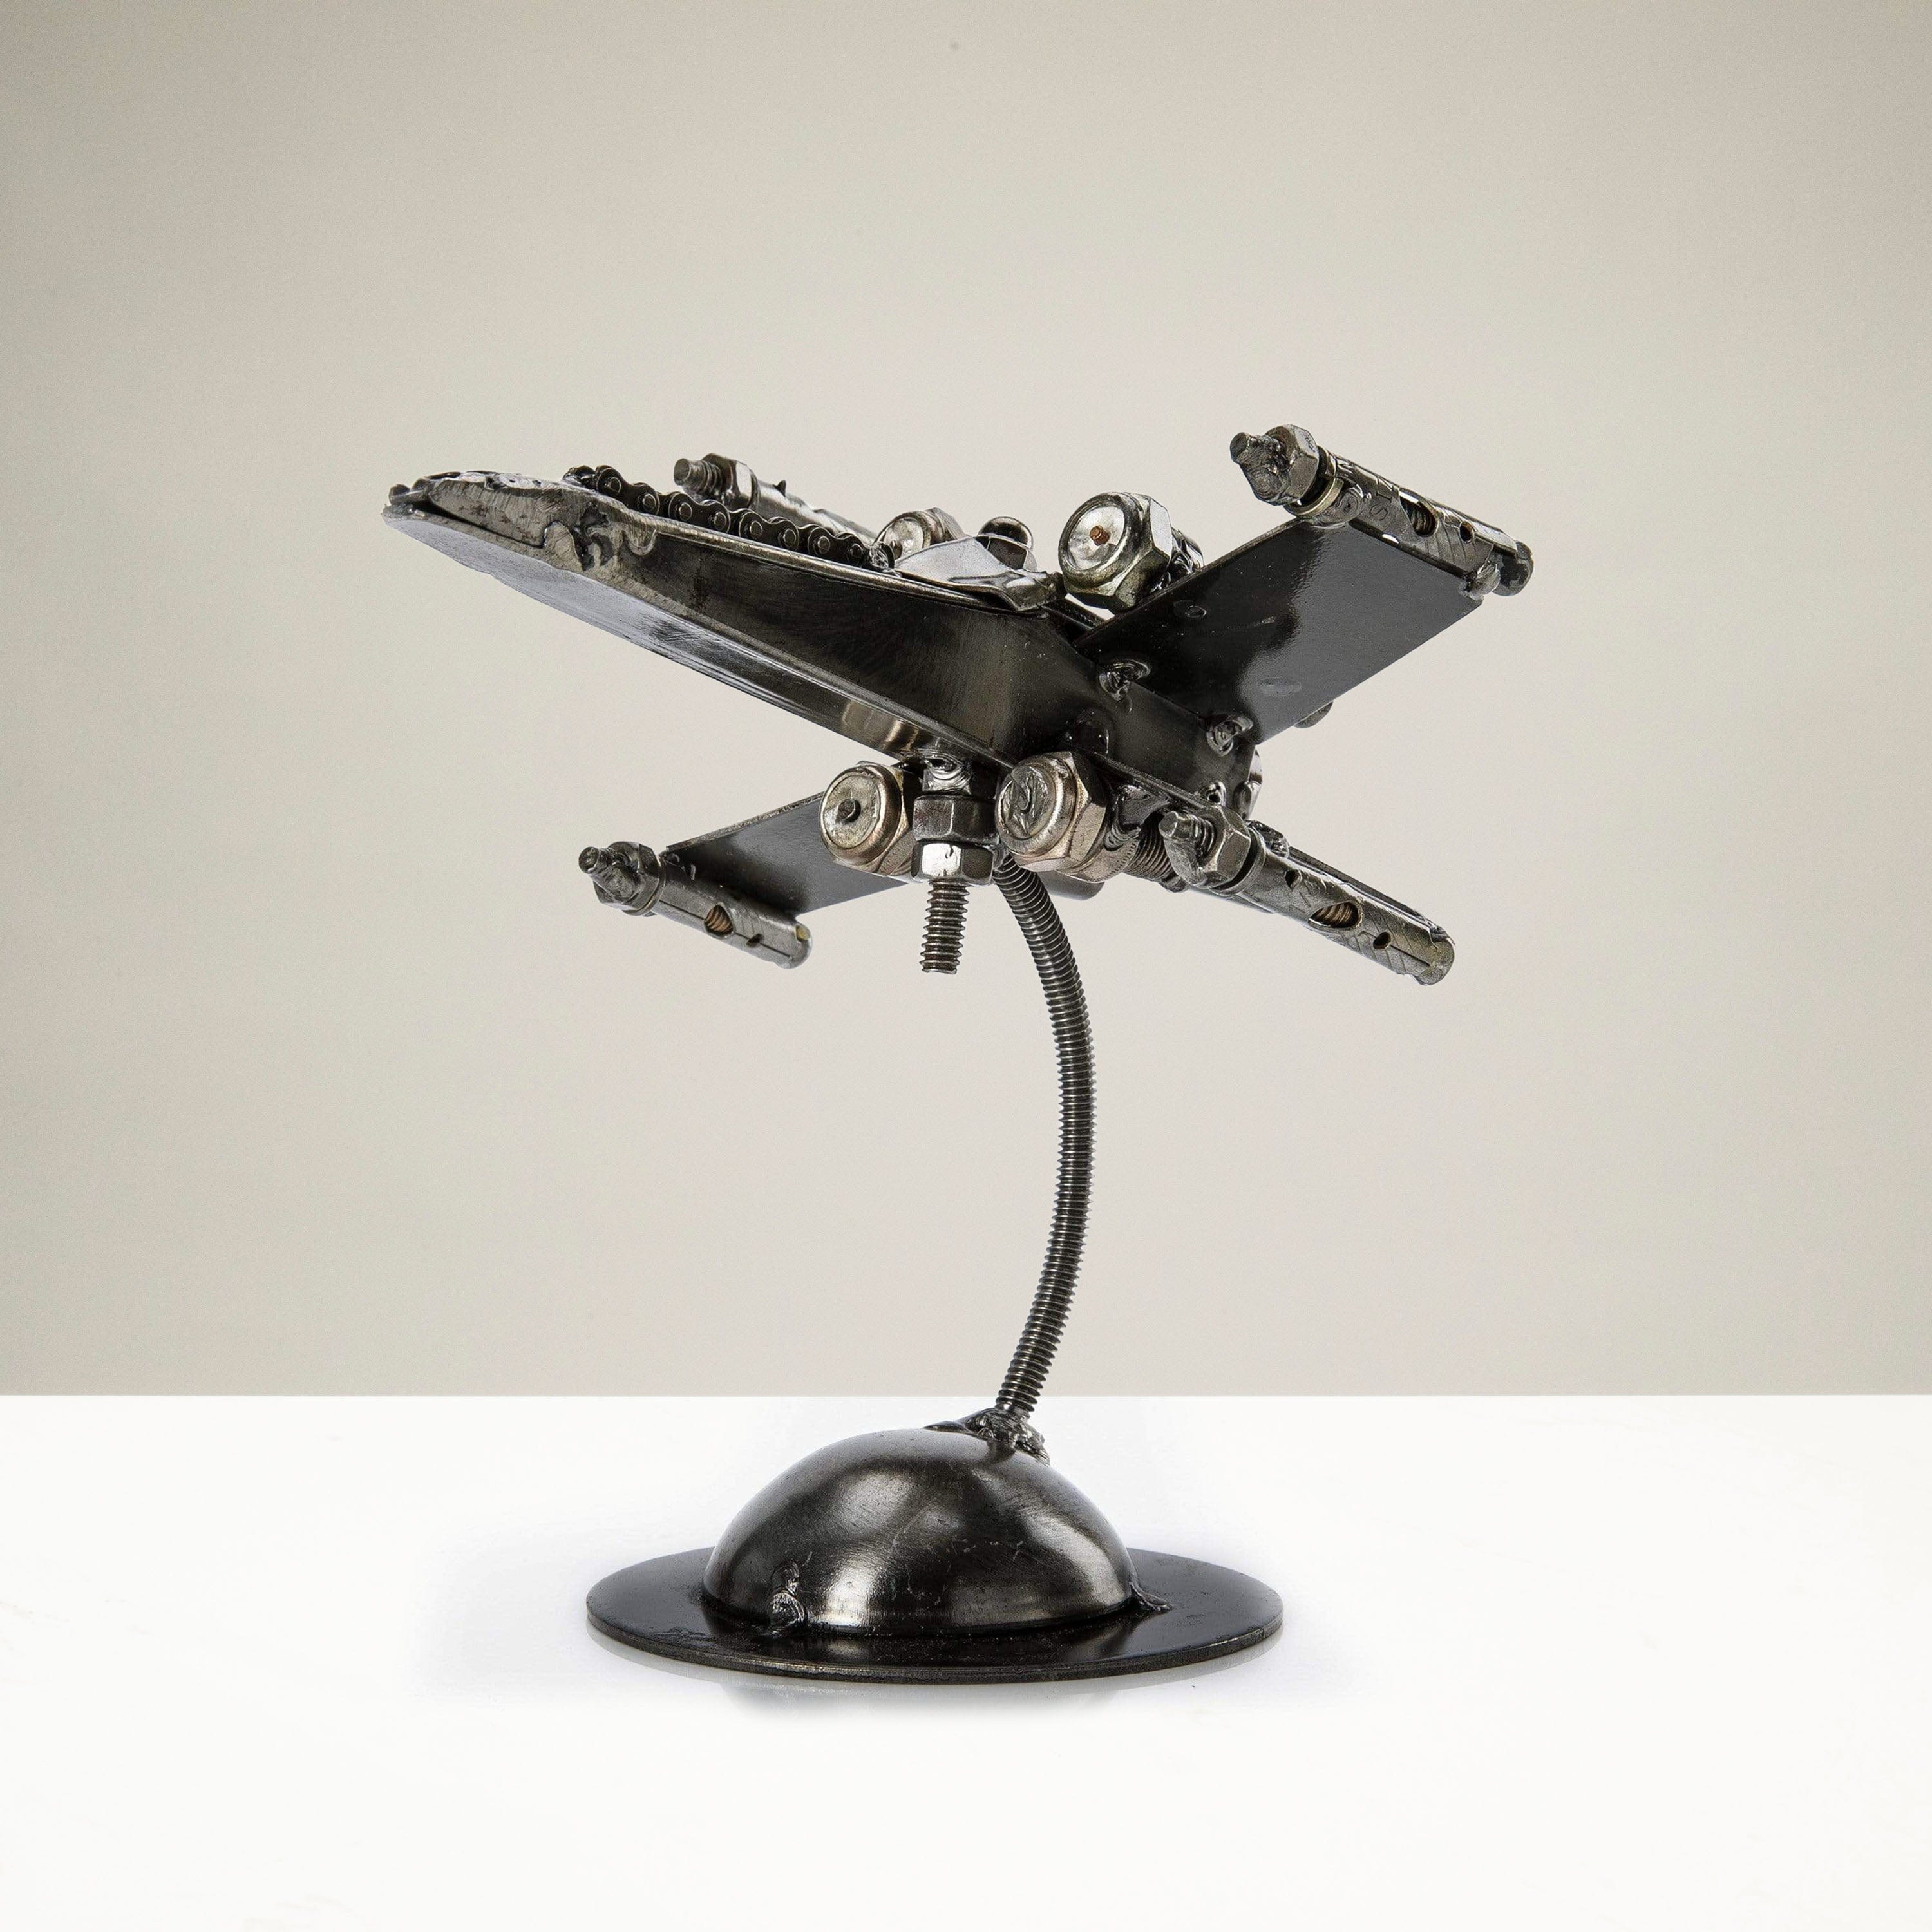 Kalifano Recycled Metal Art X-Wing Inspired Recycled Metal Sculpture RMS-400XW-N